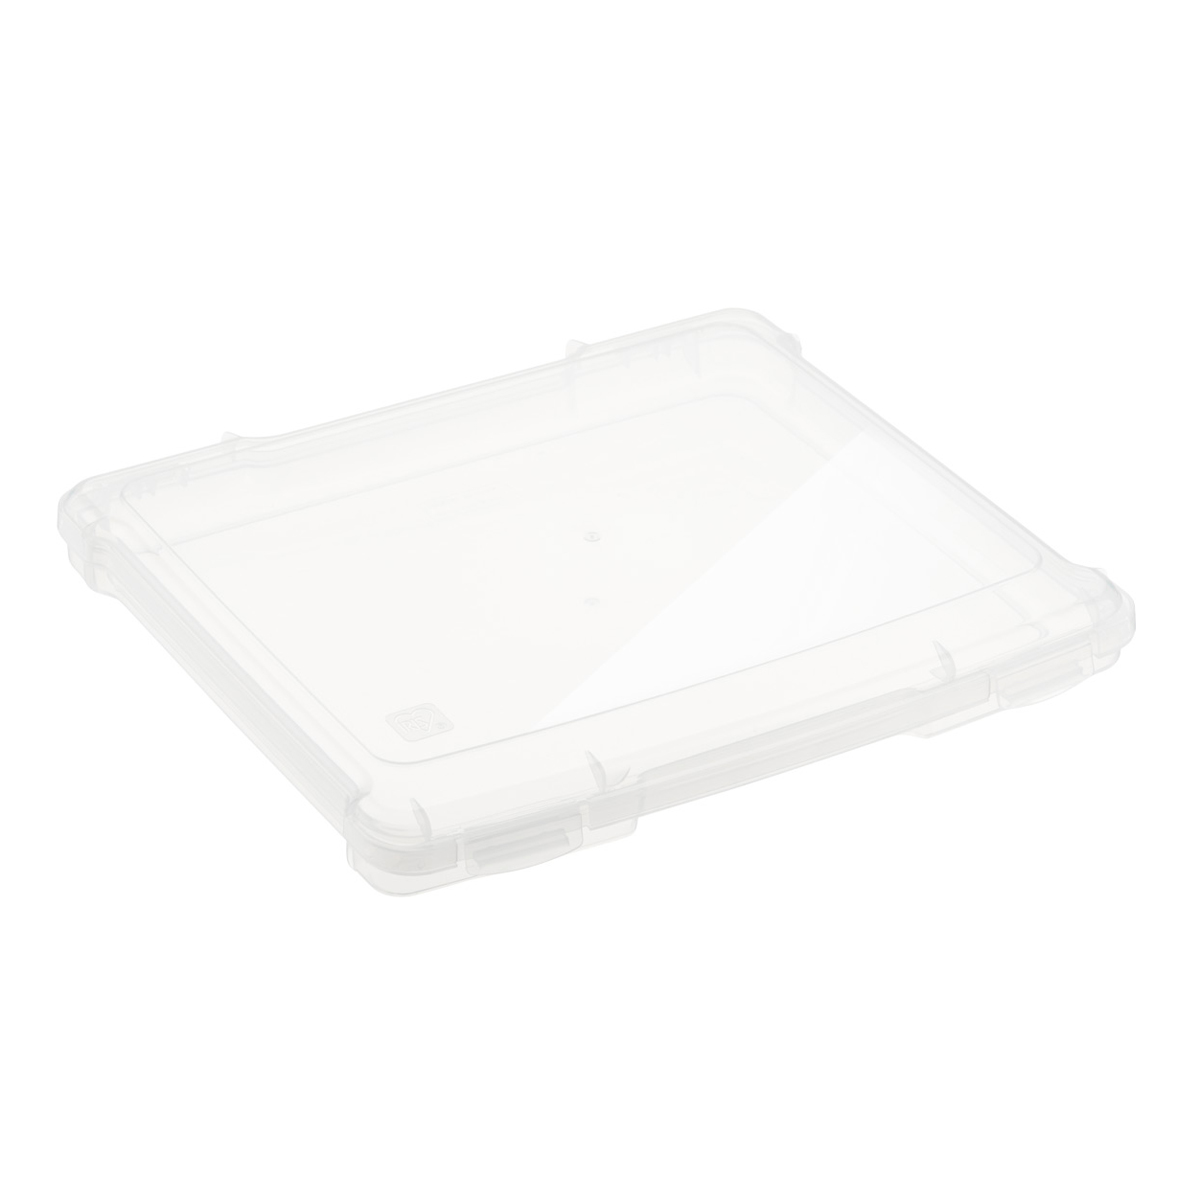 https://www.containerstore.com/catalogimages/360122/10077403-project-case-translucent-sh.jpg